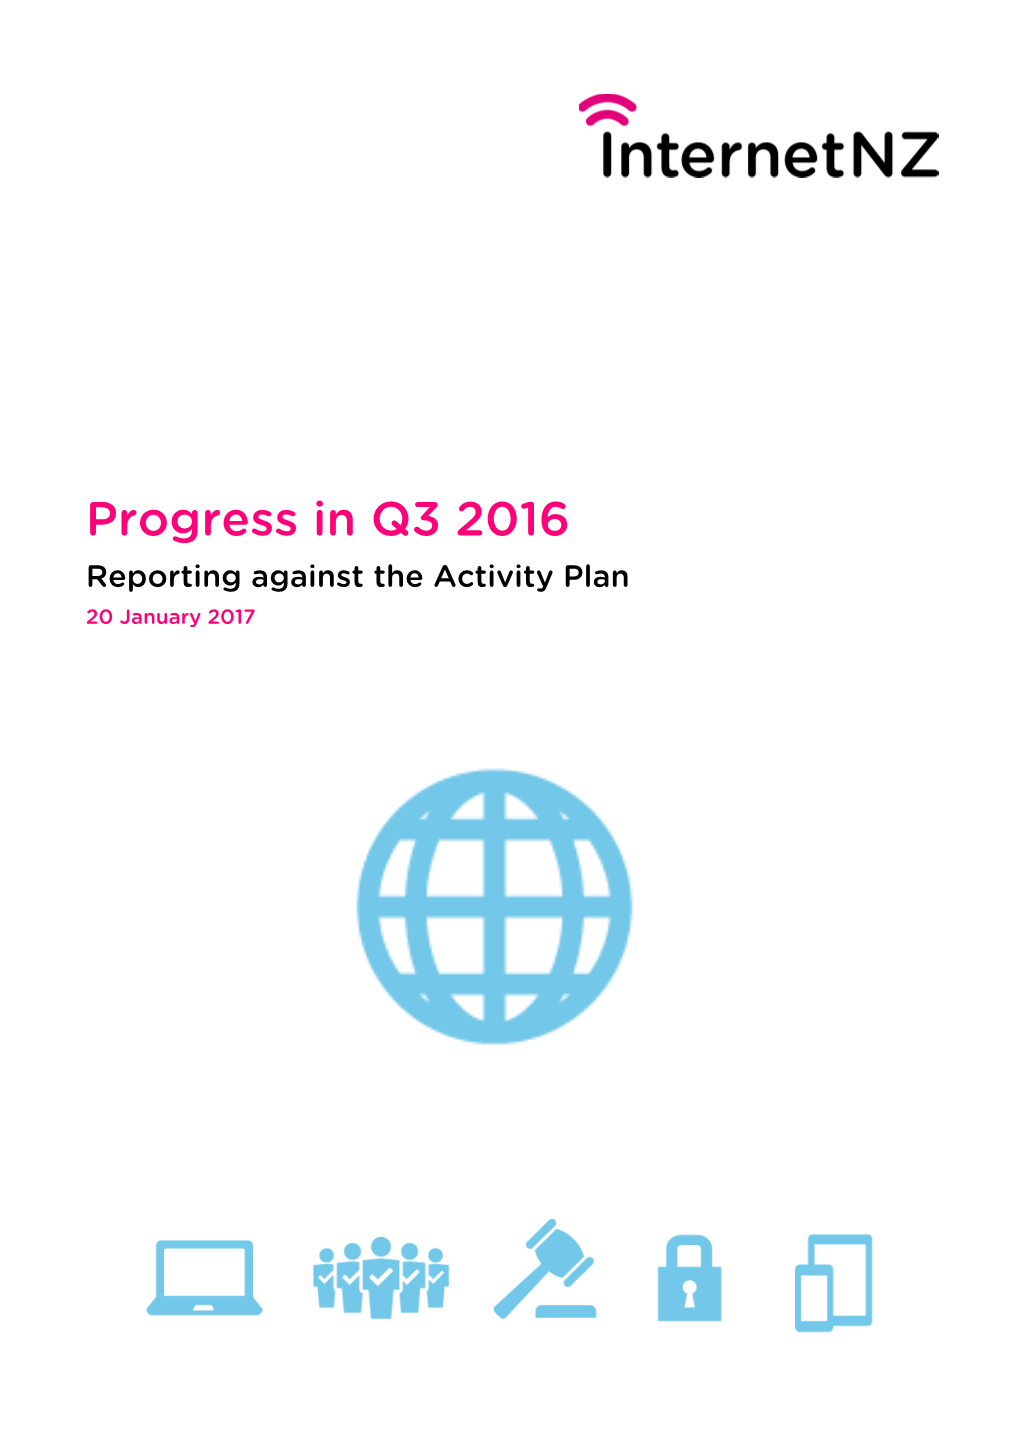 Progress in Q3 2016 Reporting Against the Activity Plan 20 January 2017